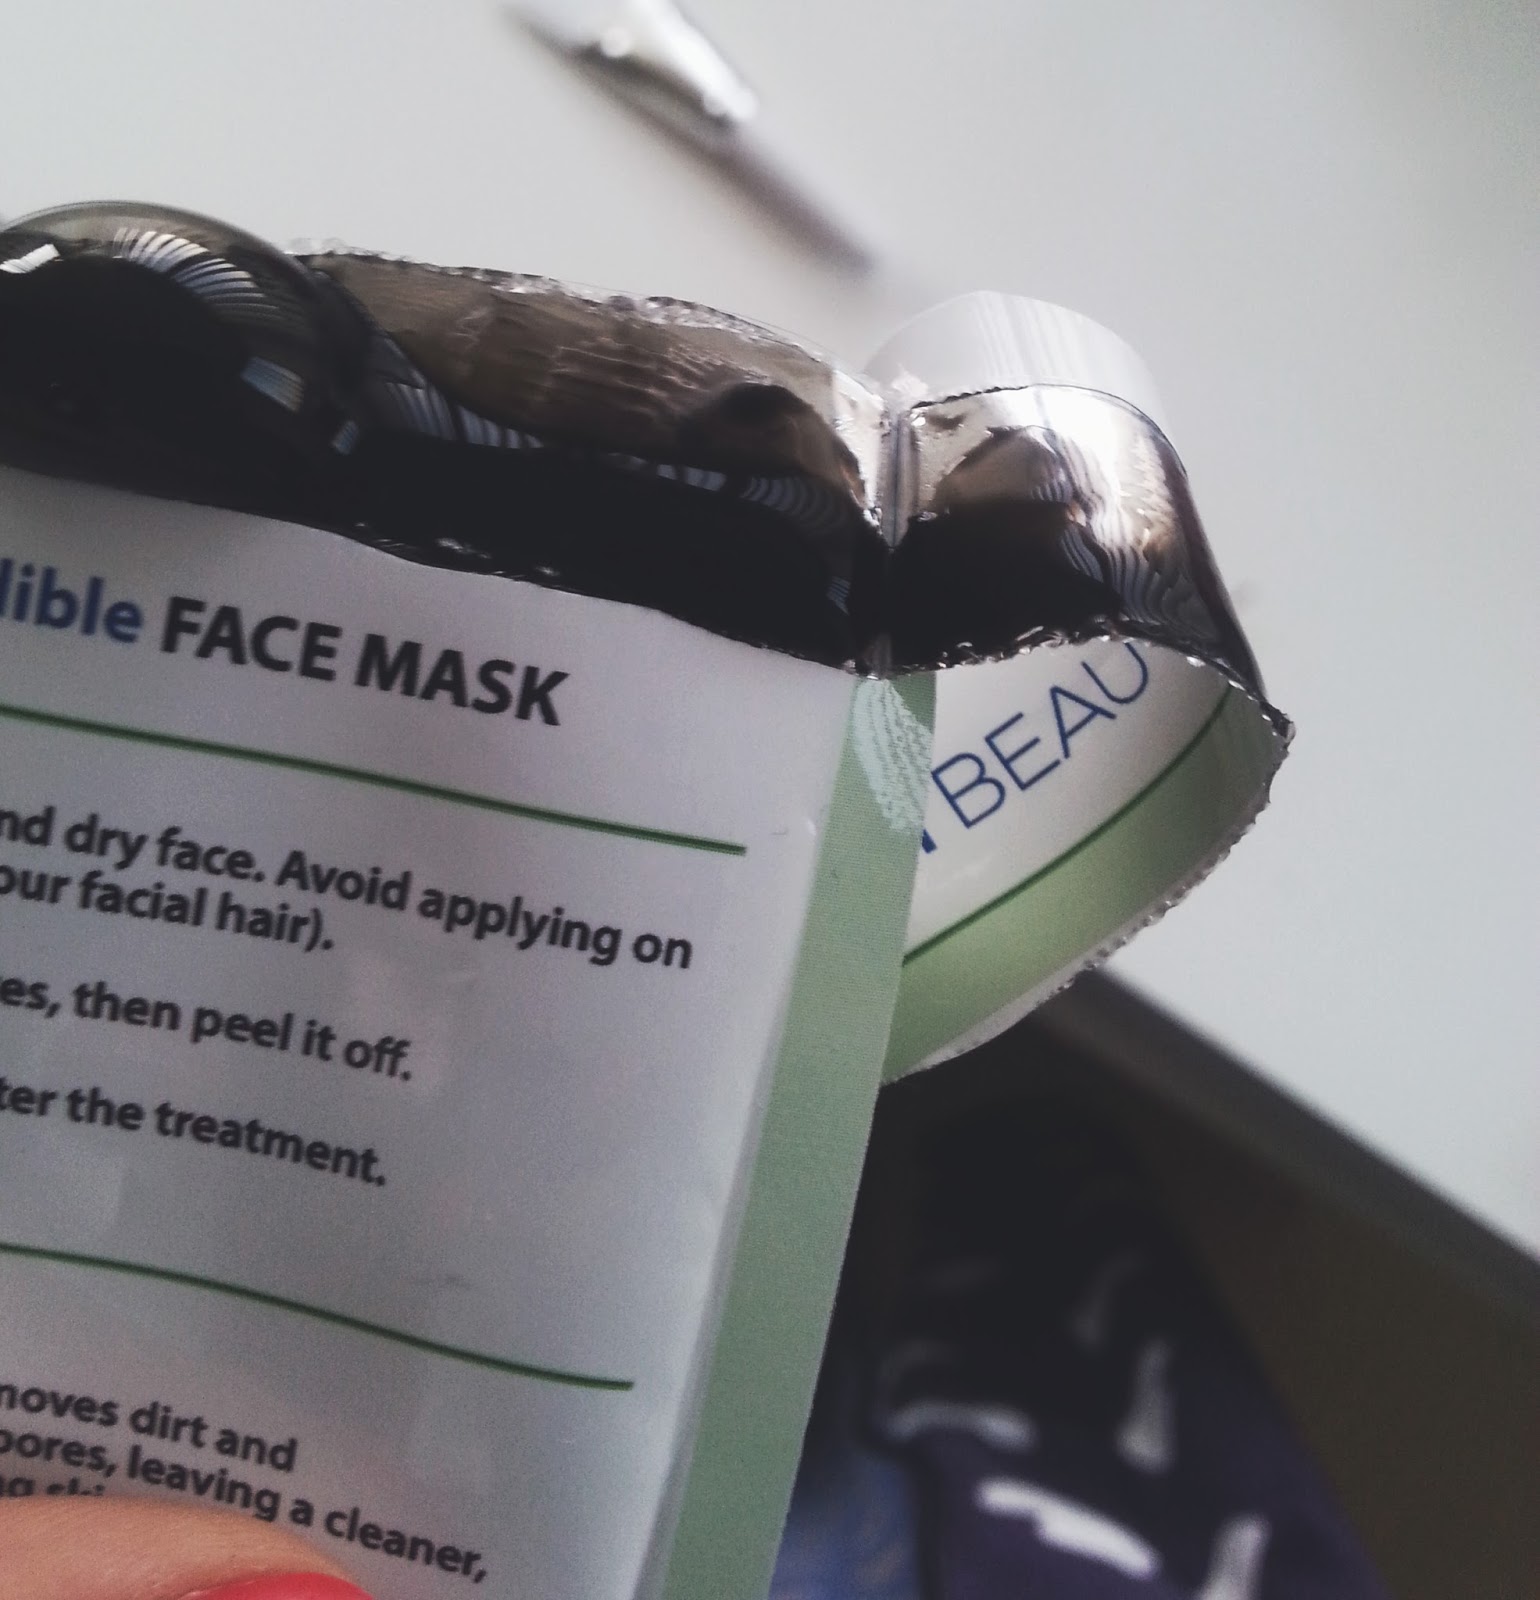 The Incredible Face Mask